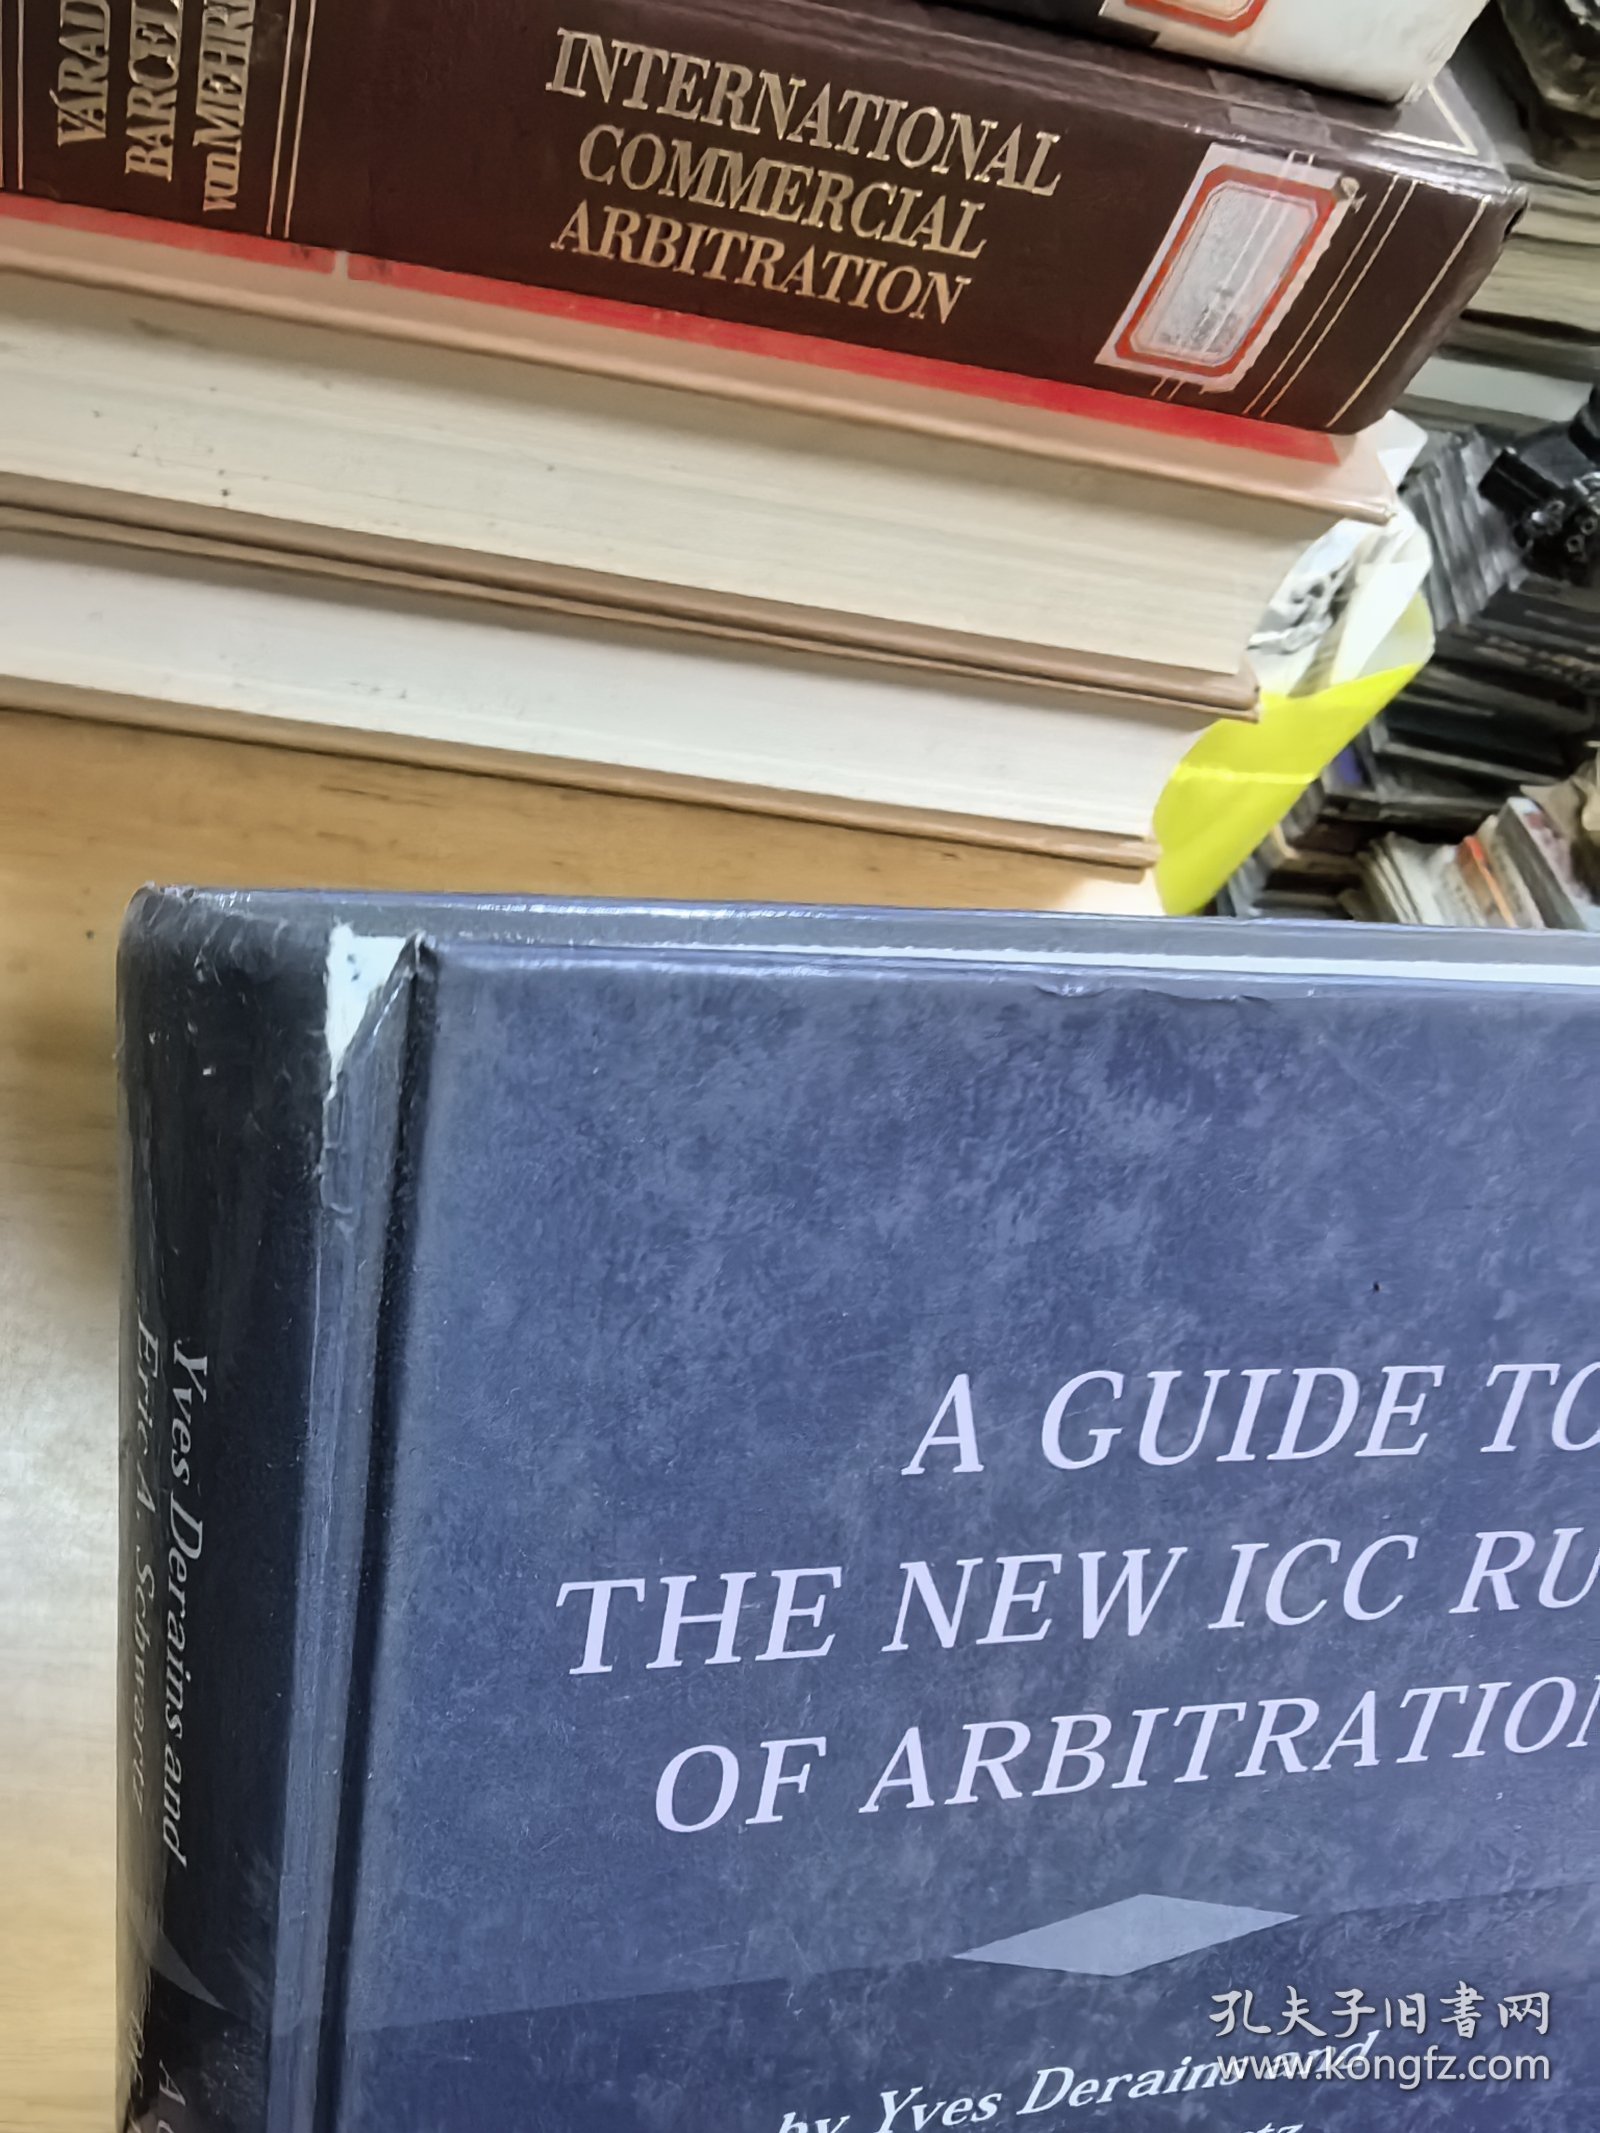 A guide to the new ICC rules of arbitration 国际商会仲裁新规则指南